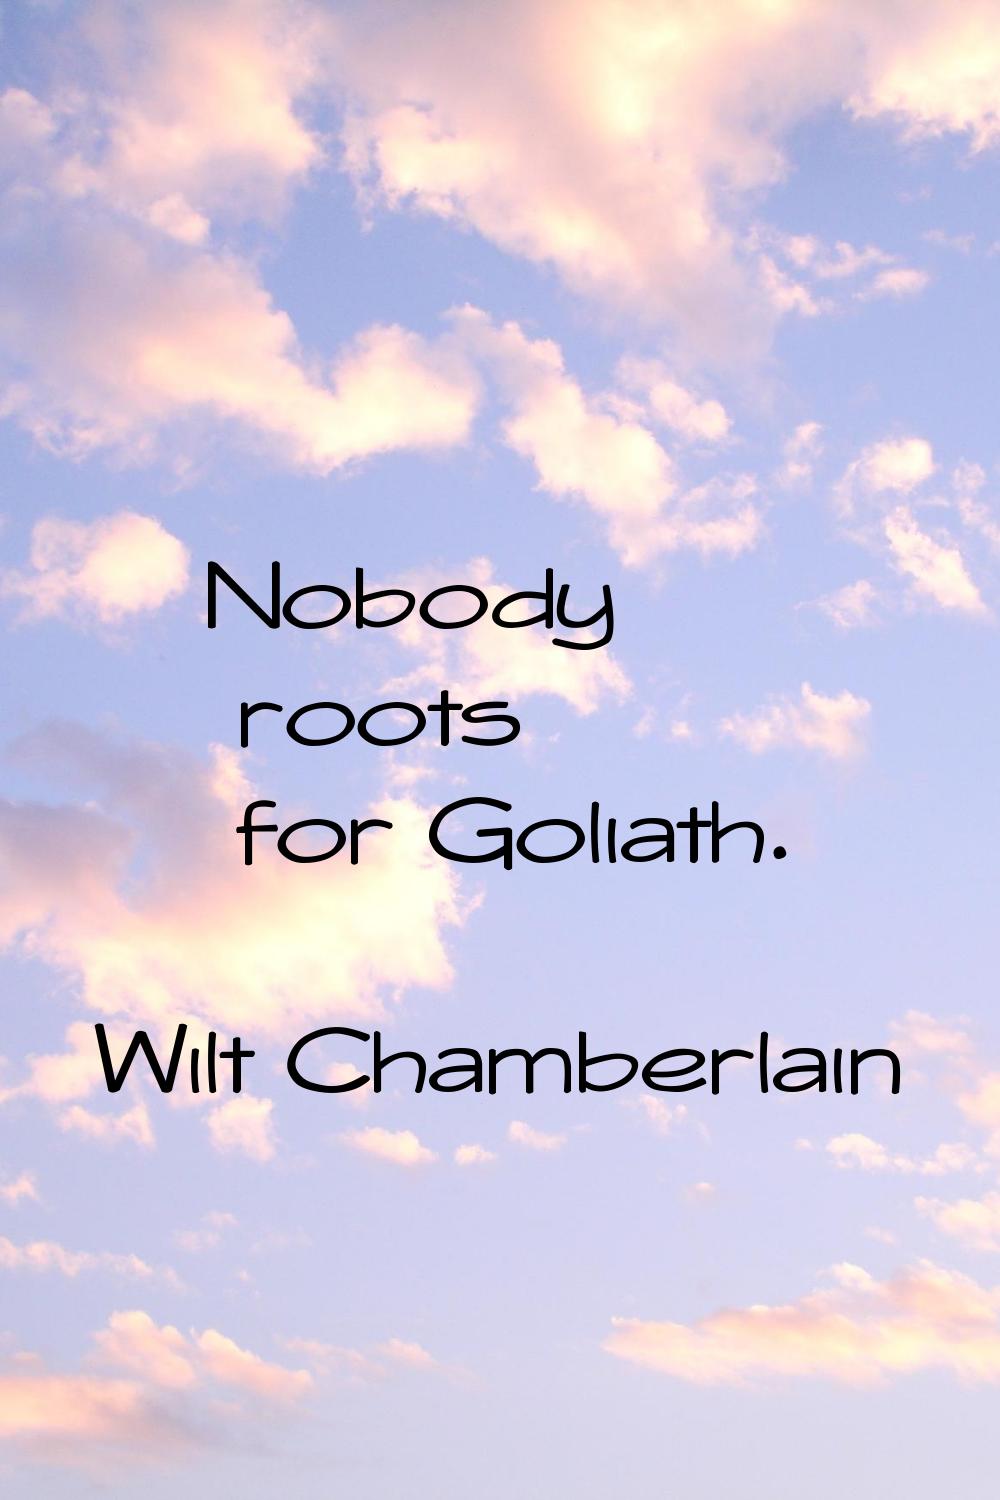 Nobody roots for Goliath.